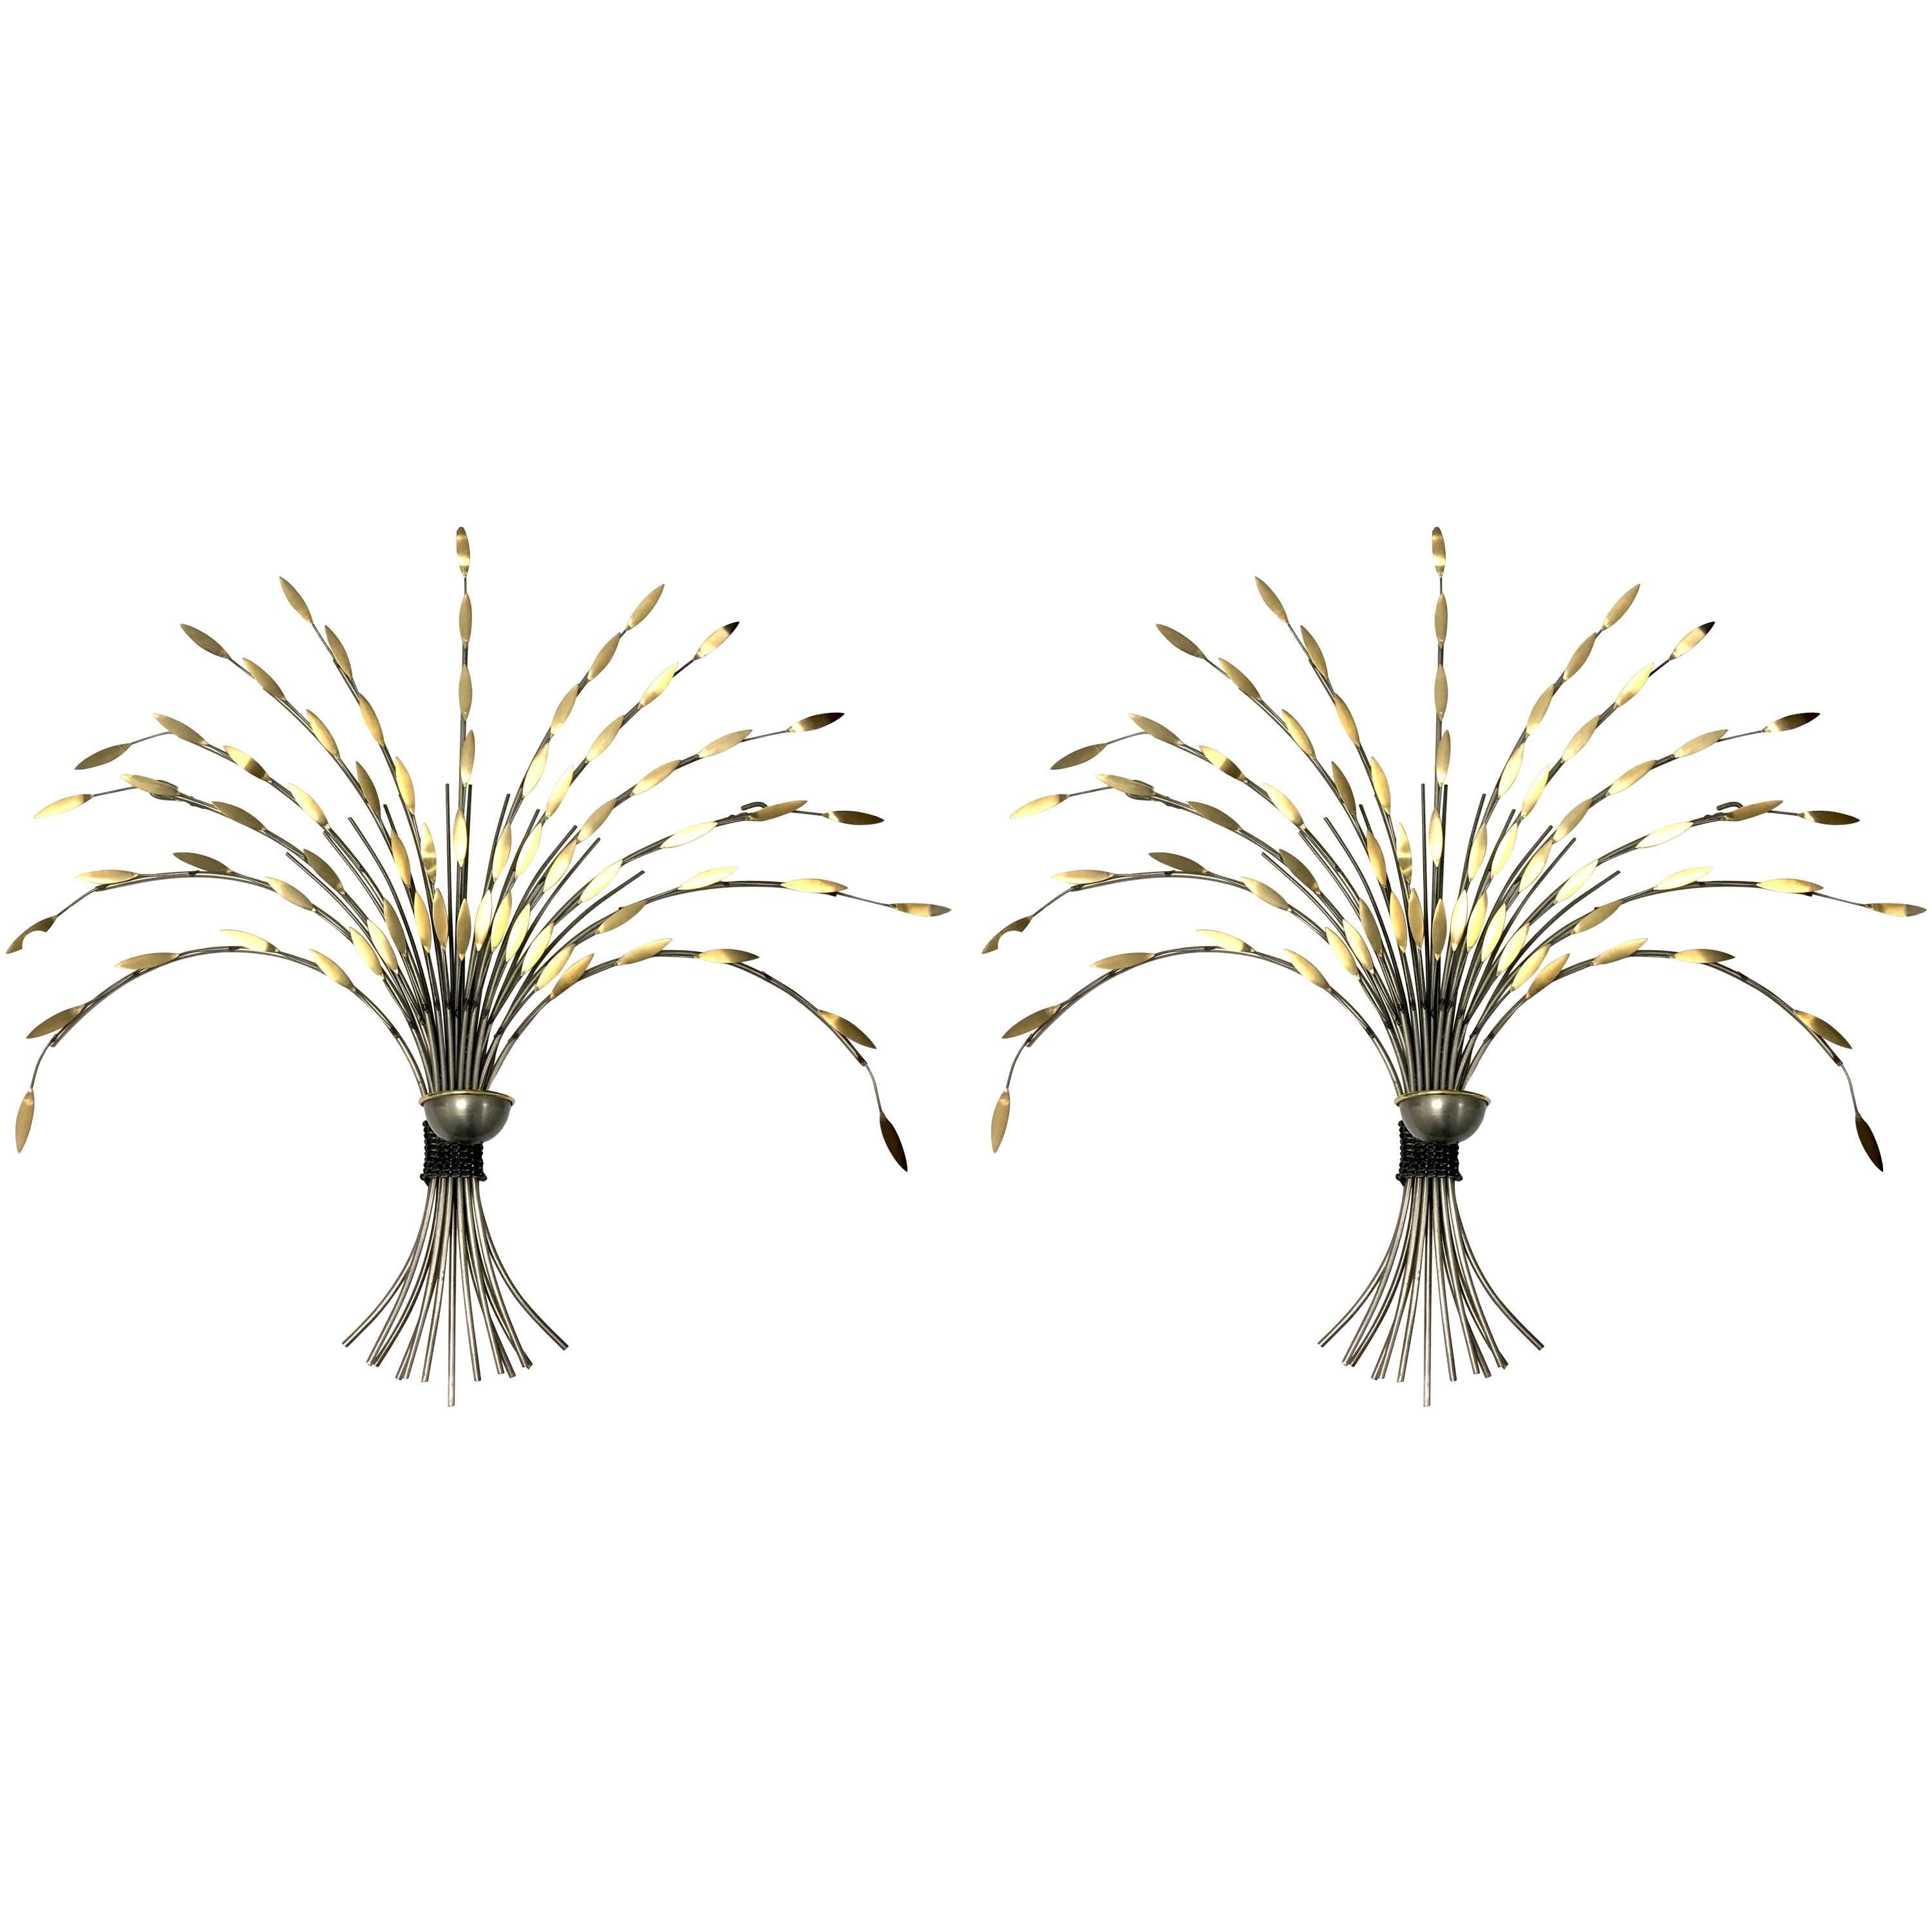 Pair of Curtis Jere Modern Sheaf of Wheat Steel and Brass Candleholders